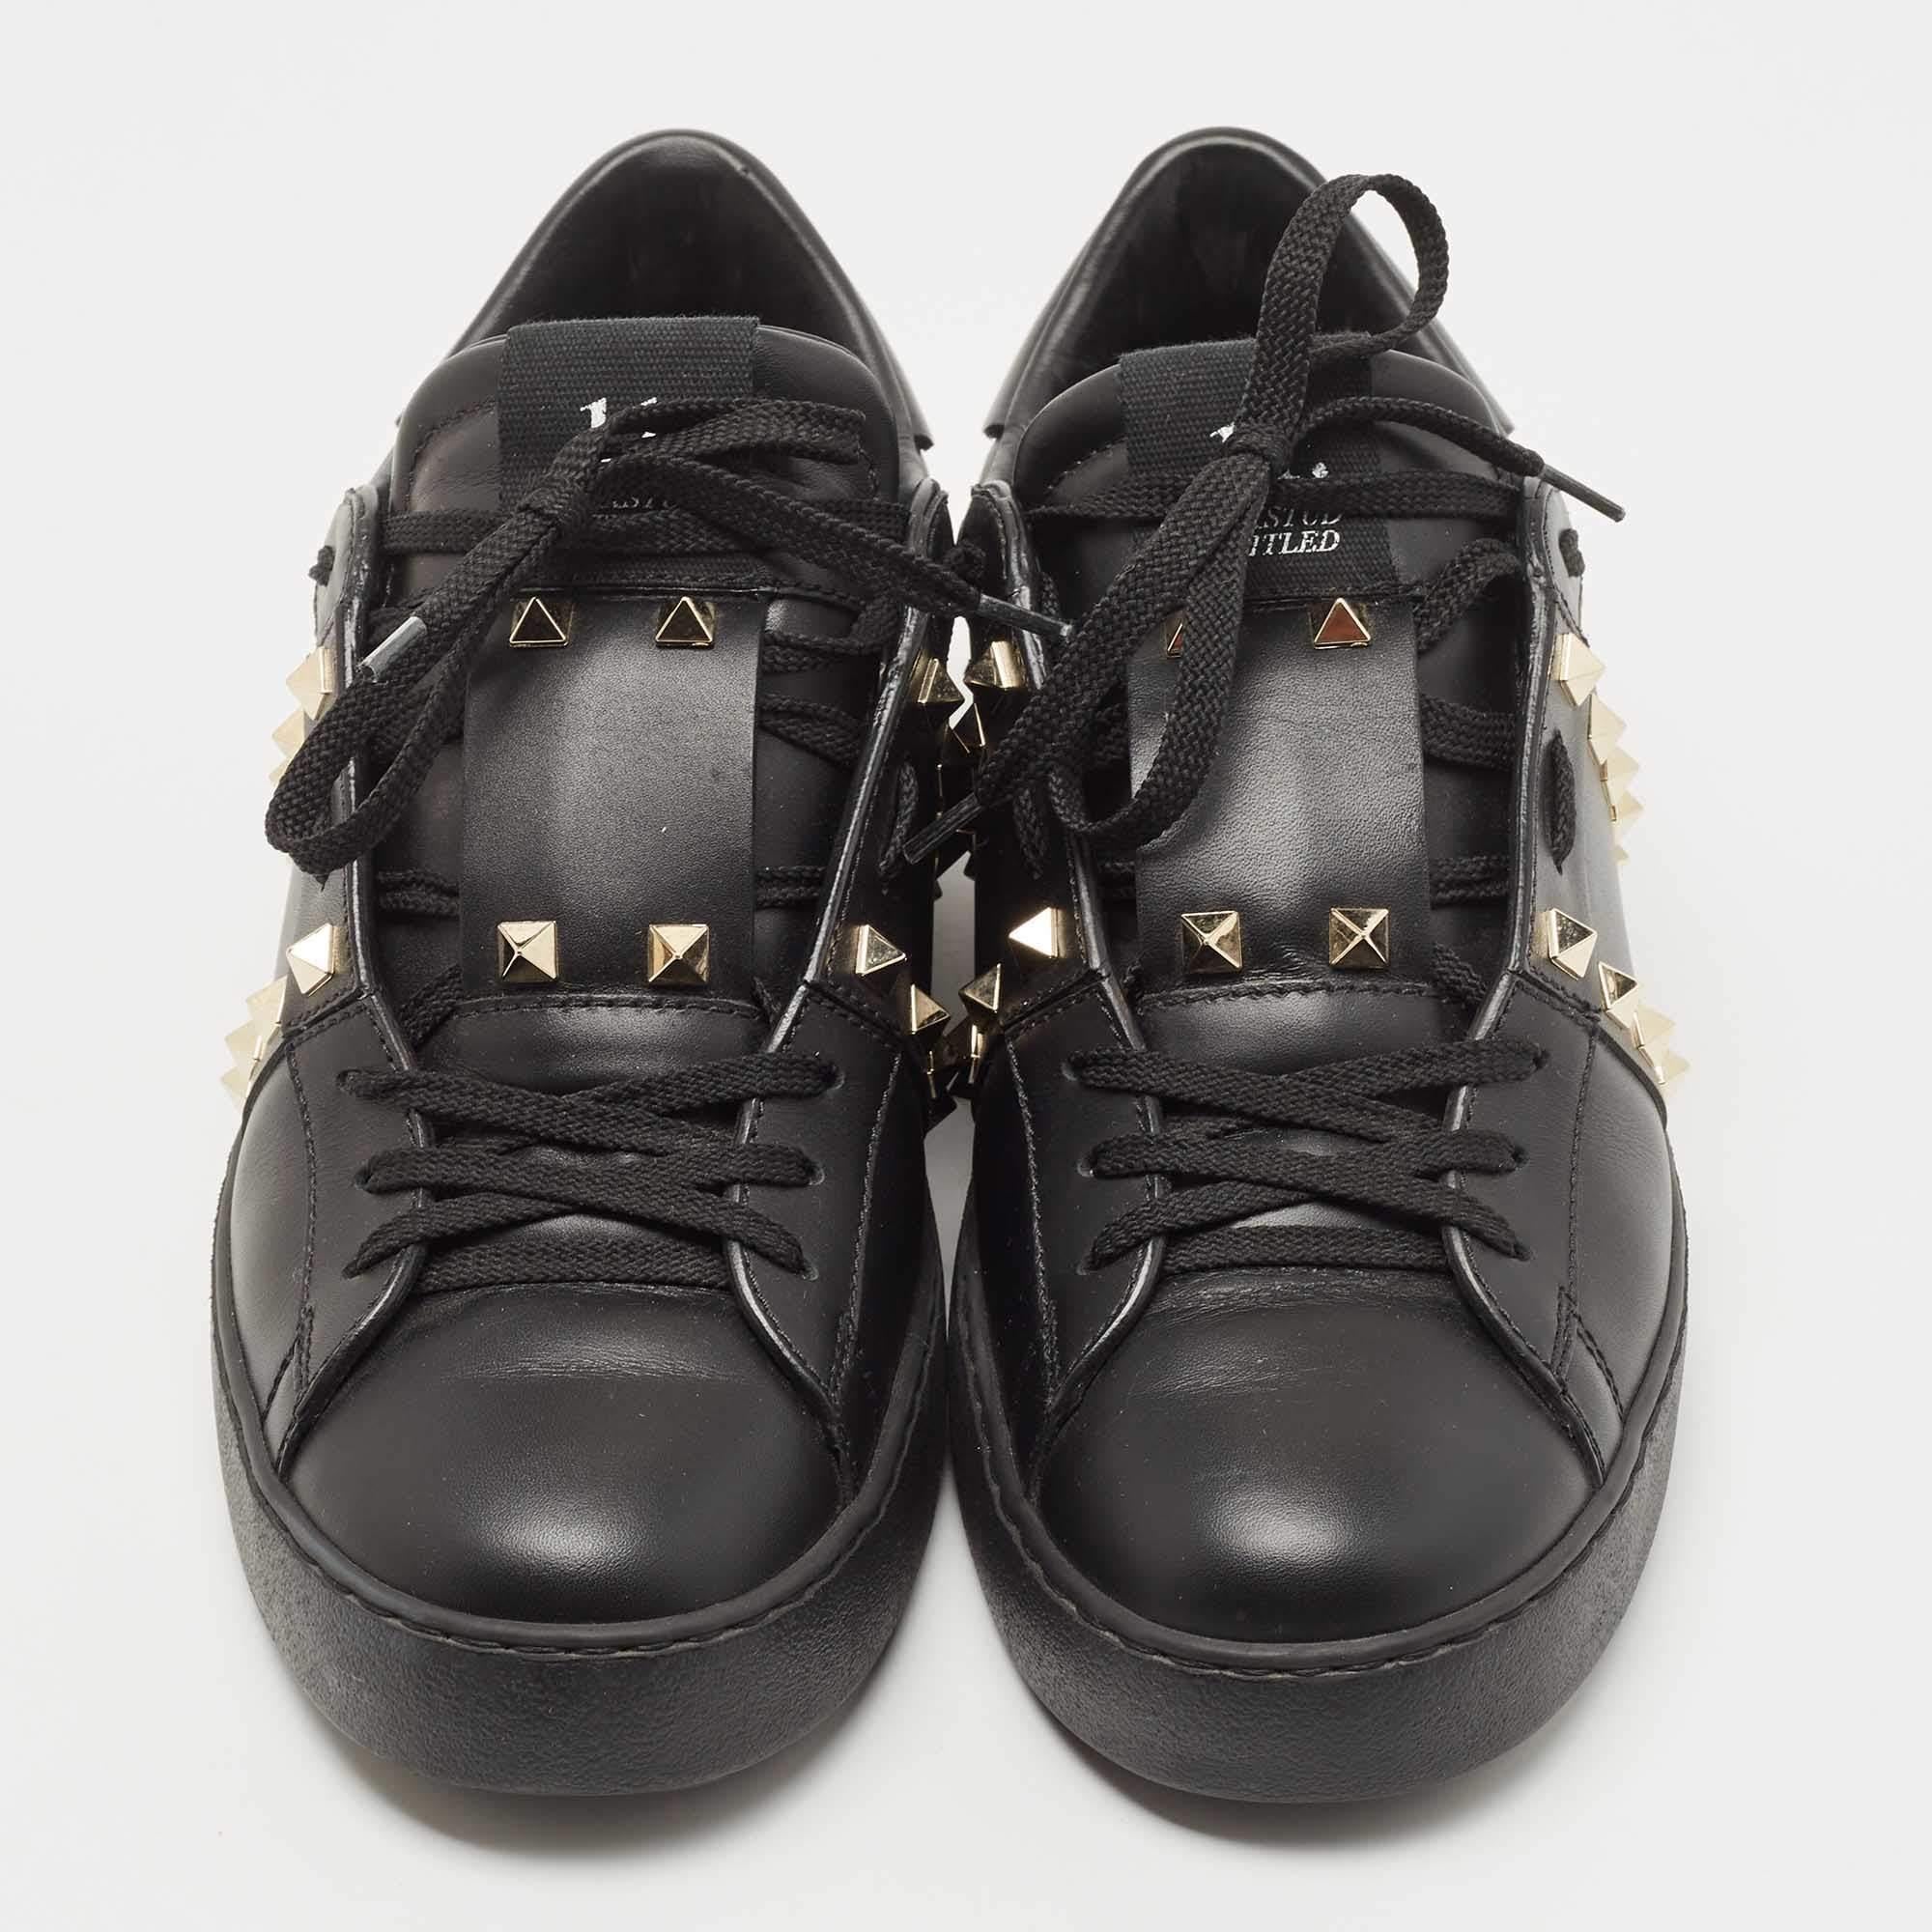 Valentino's sneaker is presented in black leather, with Rockstud details and simple laces for easy securing. The shoes fit well and look great.

Includes: Original Dustbag

